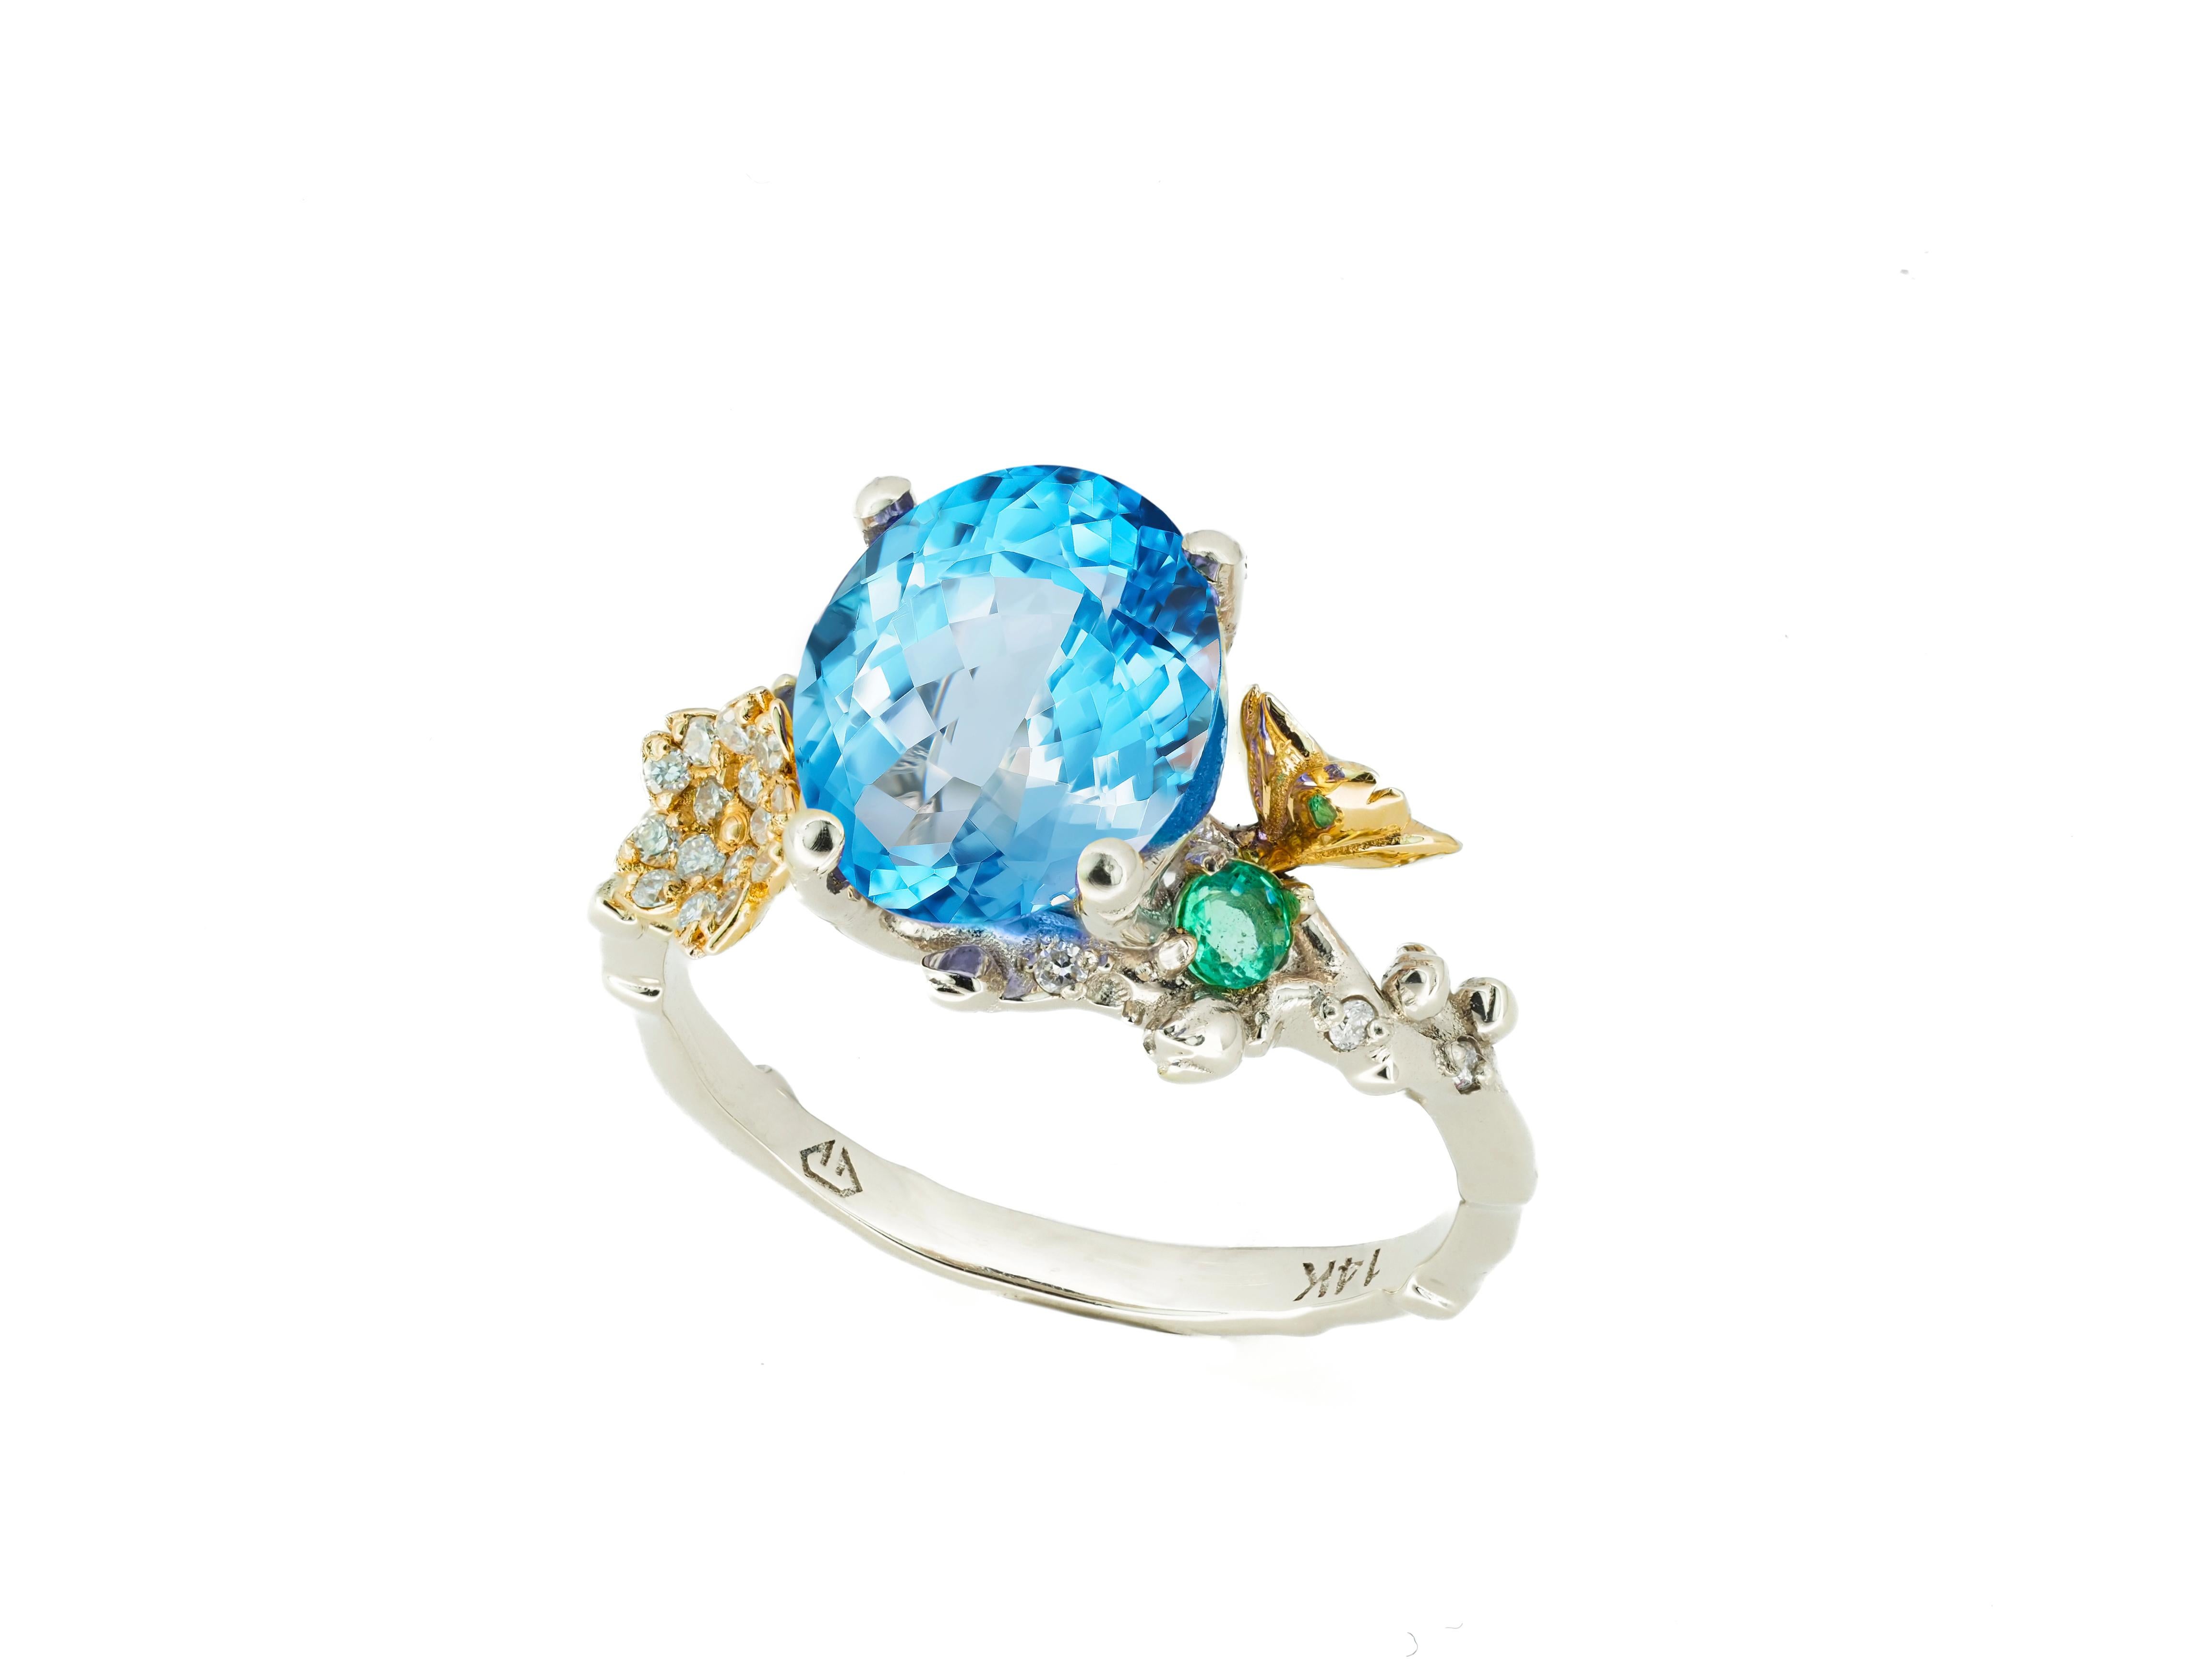 Topaz cocktail ring. 
Sky blue Topaz 14k gold ring. Topaz statement gold ring. Oval Topaz ring. Topaz and diamonds ring. Flower gold ring.

Metal: 14k gold : yellow and white.
Weight: 3.85 gr depends from size.

Central stone natural Topaz
Weight: